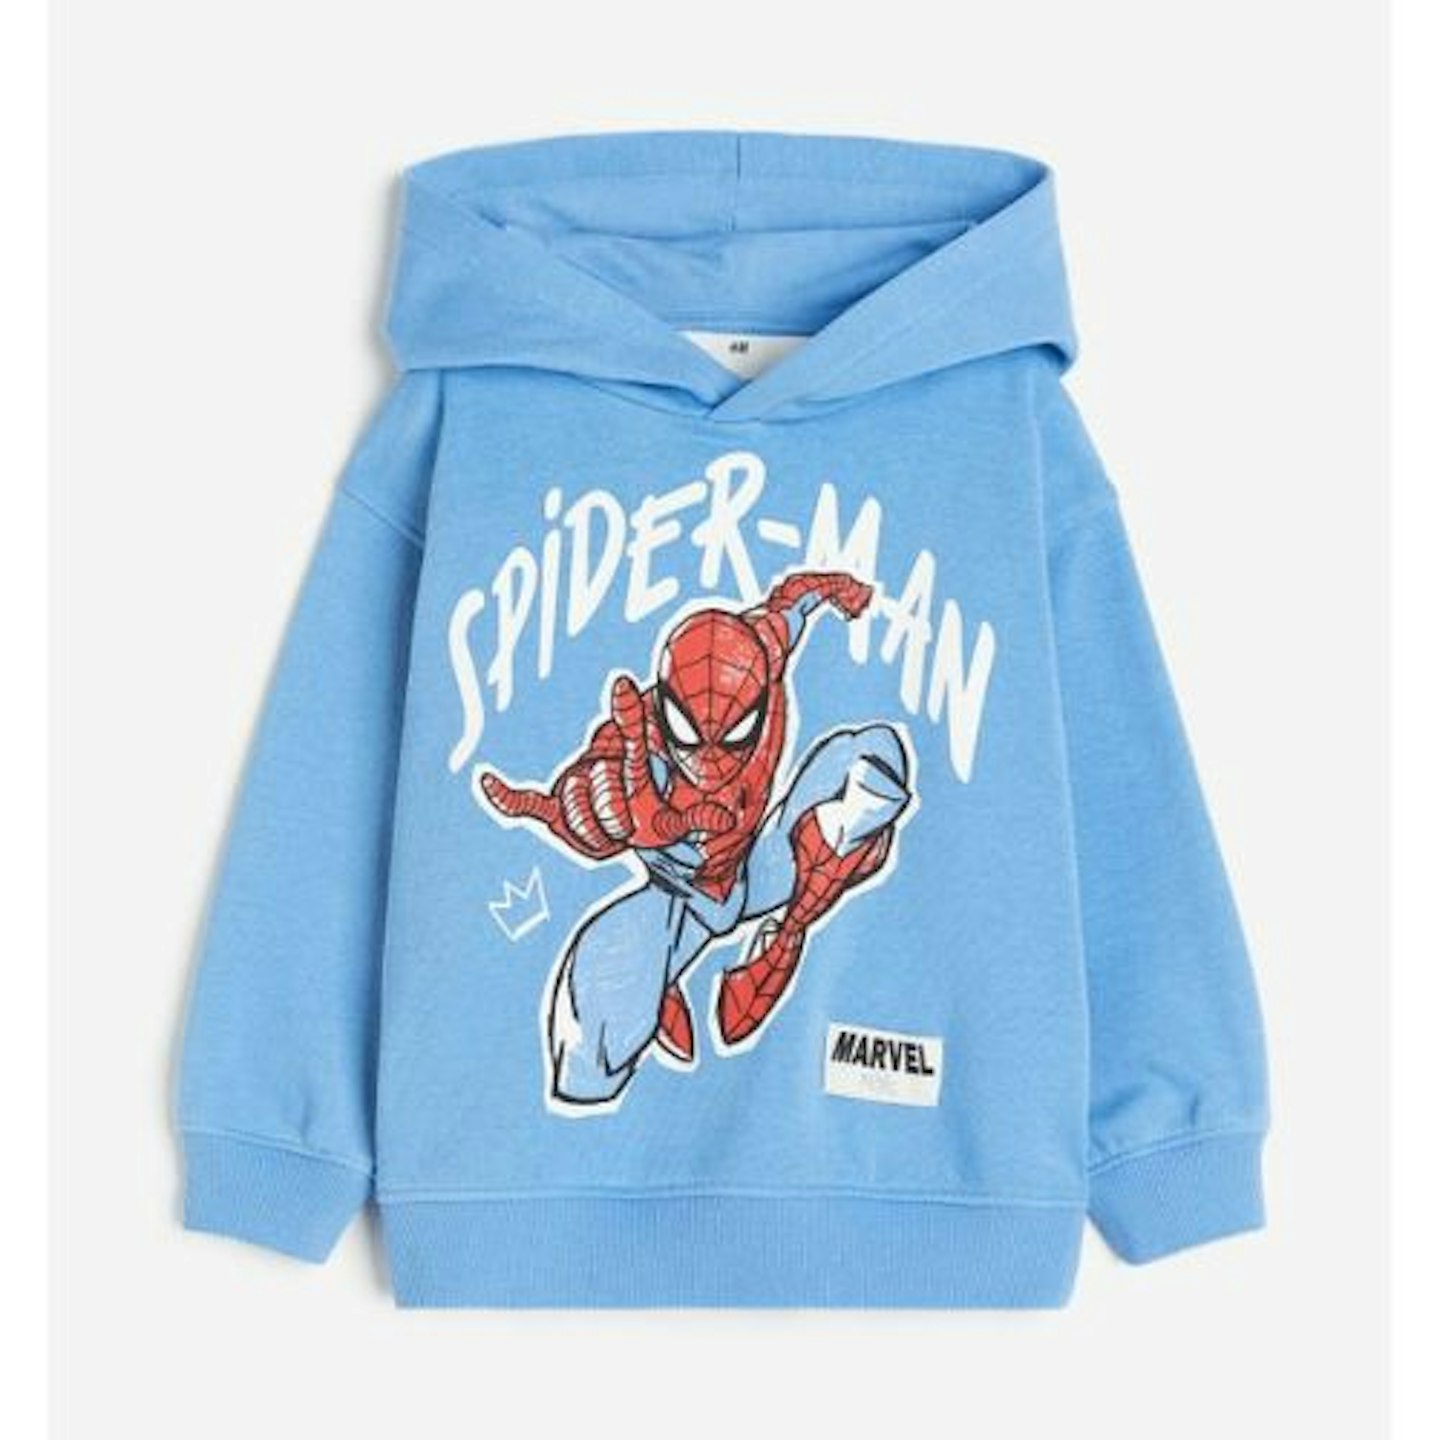 Best Disney clothes for baby Spider-Man Printed Hoodie